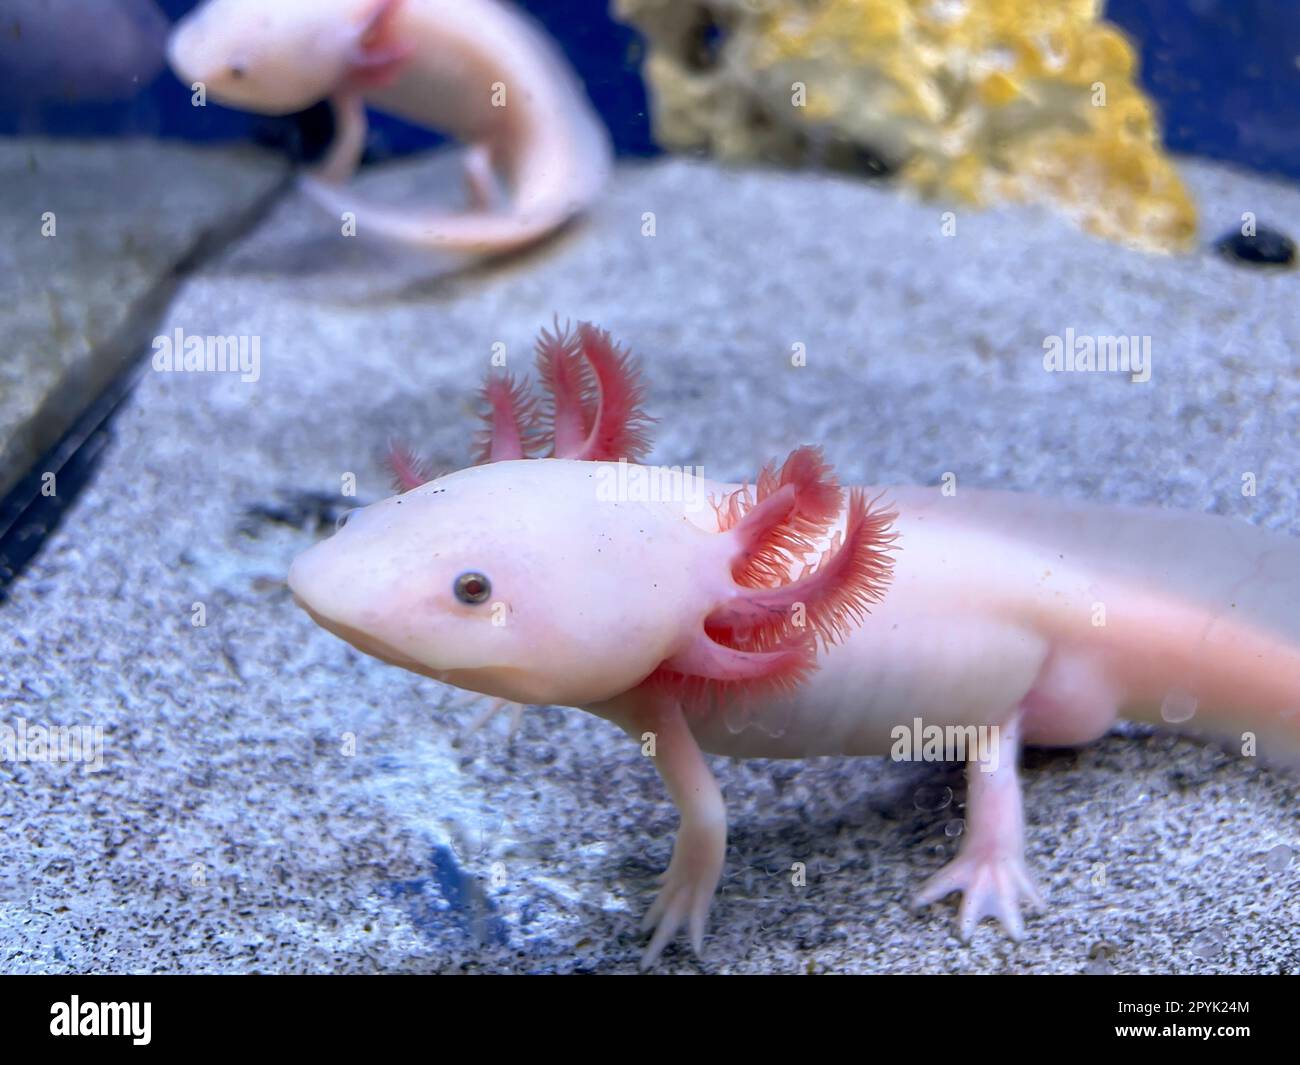 An axolotl in the aquarium. The axolotl is an aquatic Mexican caudate from the cross-toothed newt family. Stock Photo